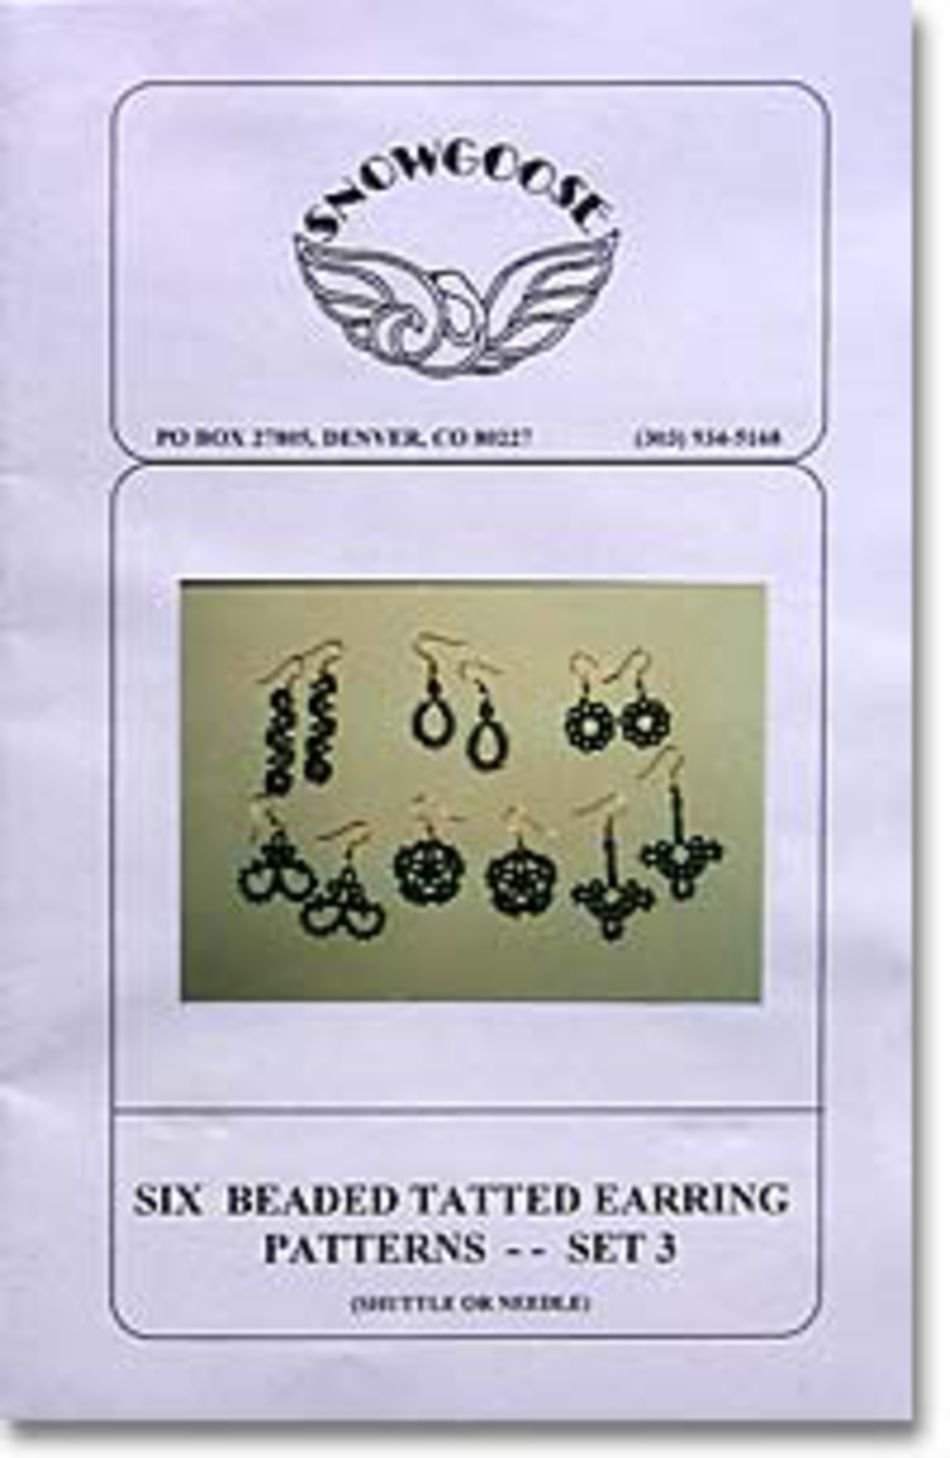 Bobbin Lace and Tatting Patterns Beaded Tatted Earrings Set 3